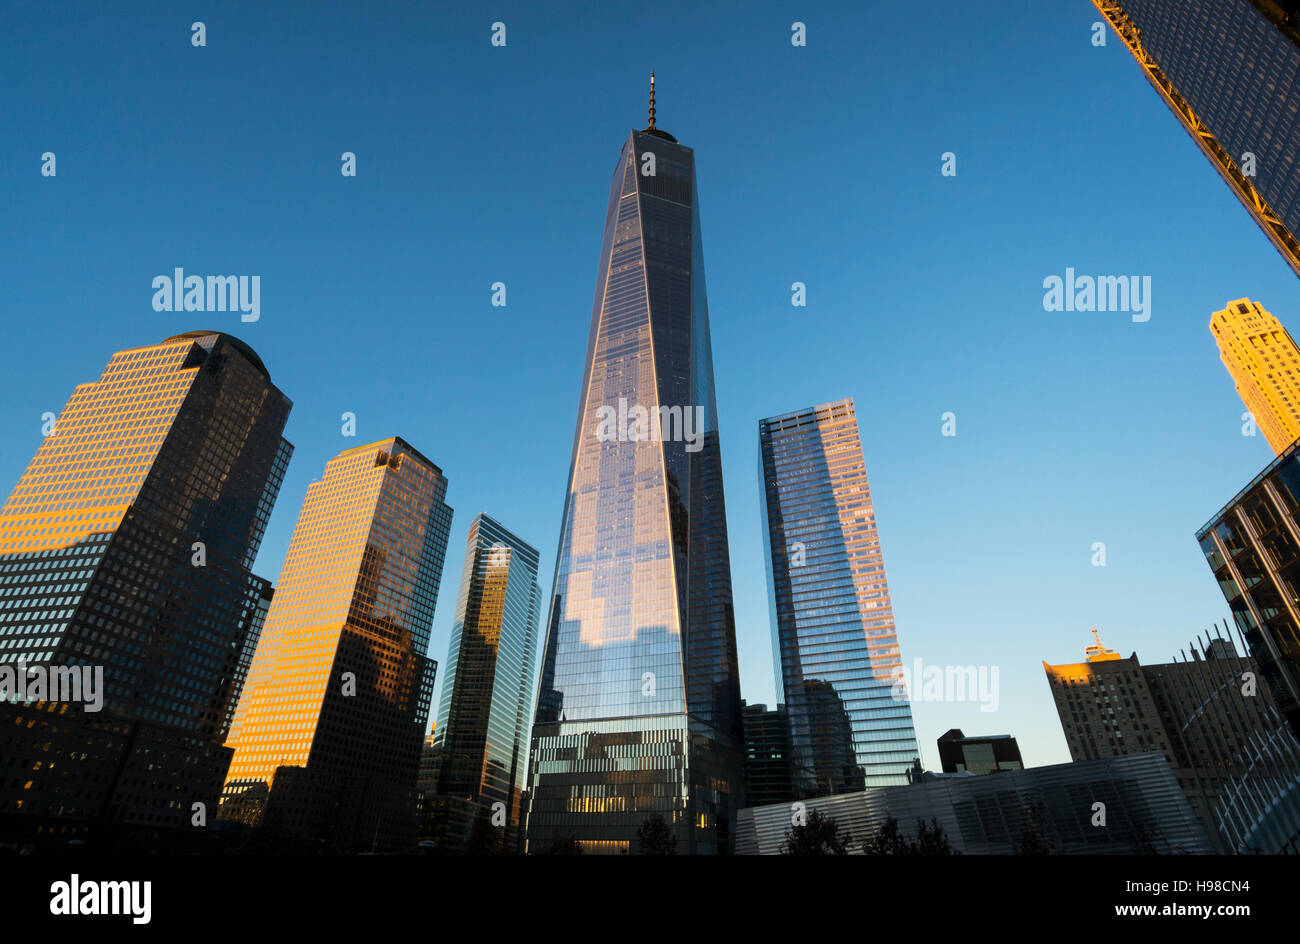 Freedom Tower, One World Trade Center, skyscrapers in Lower Manhattan Stock Photo